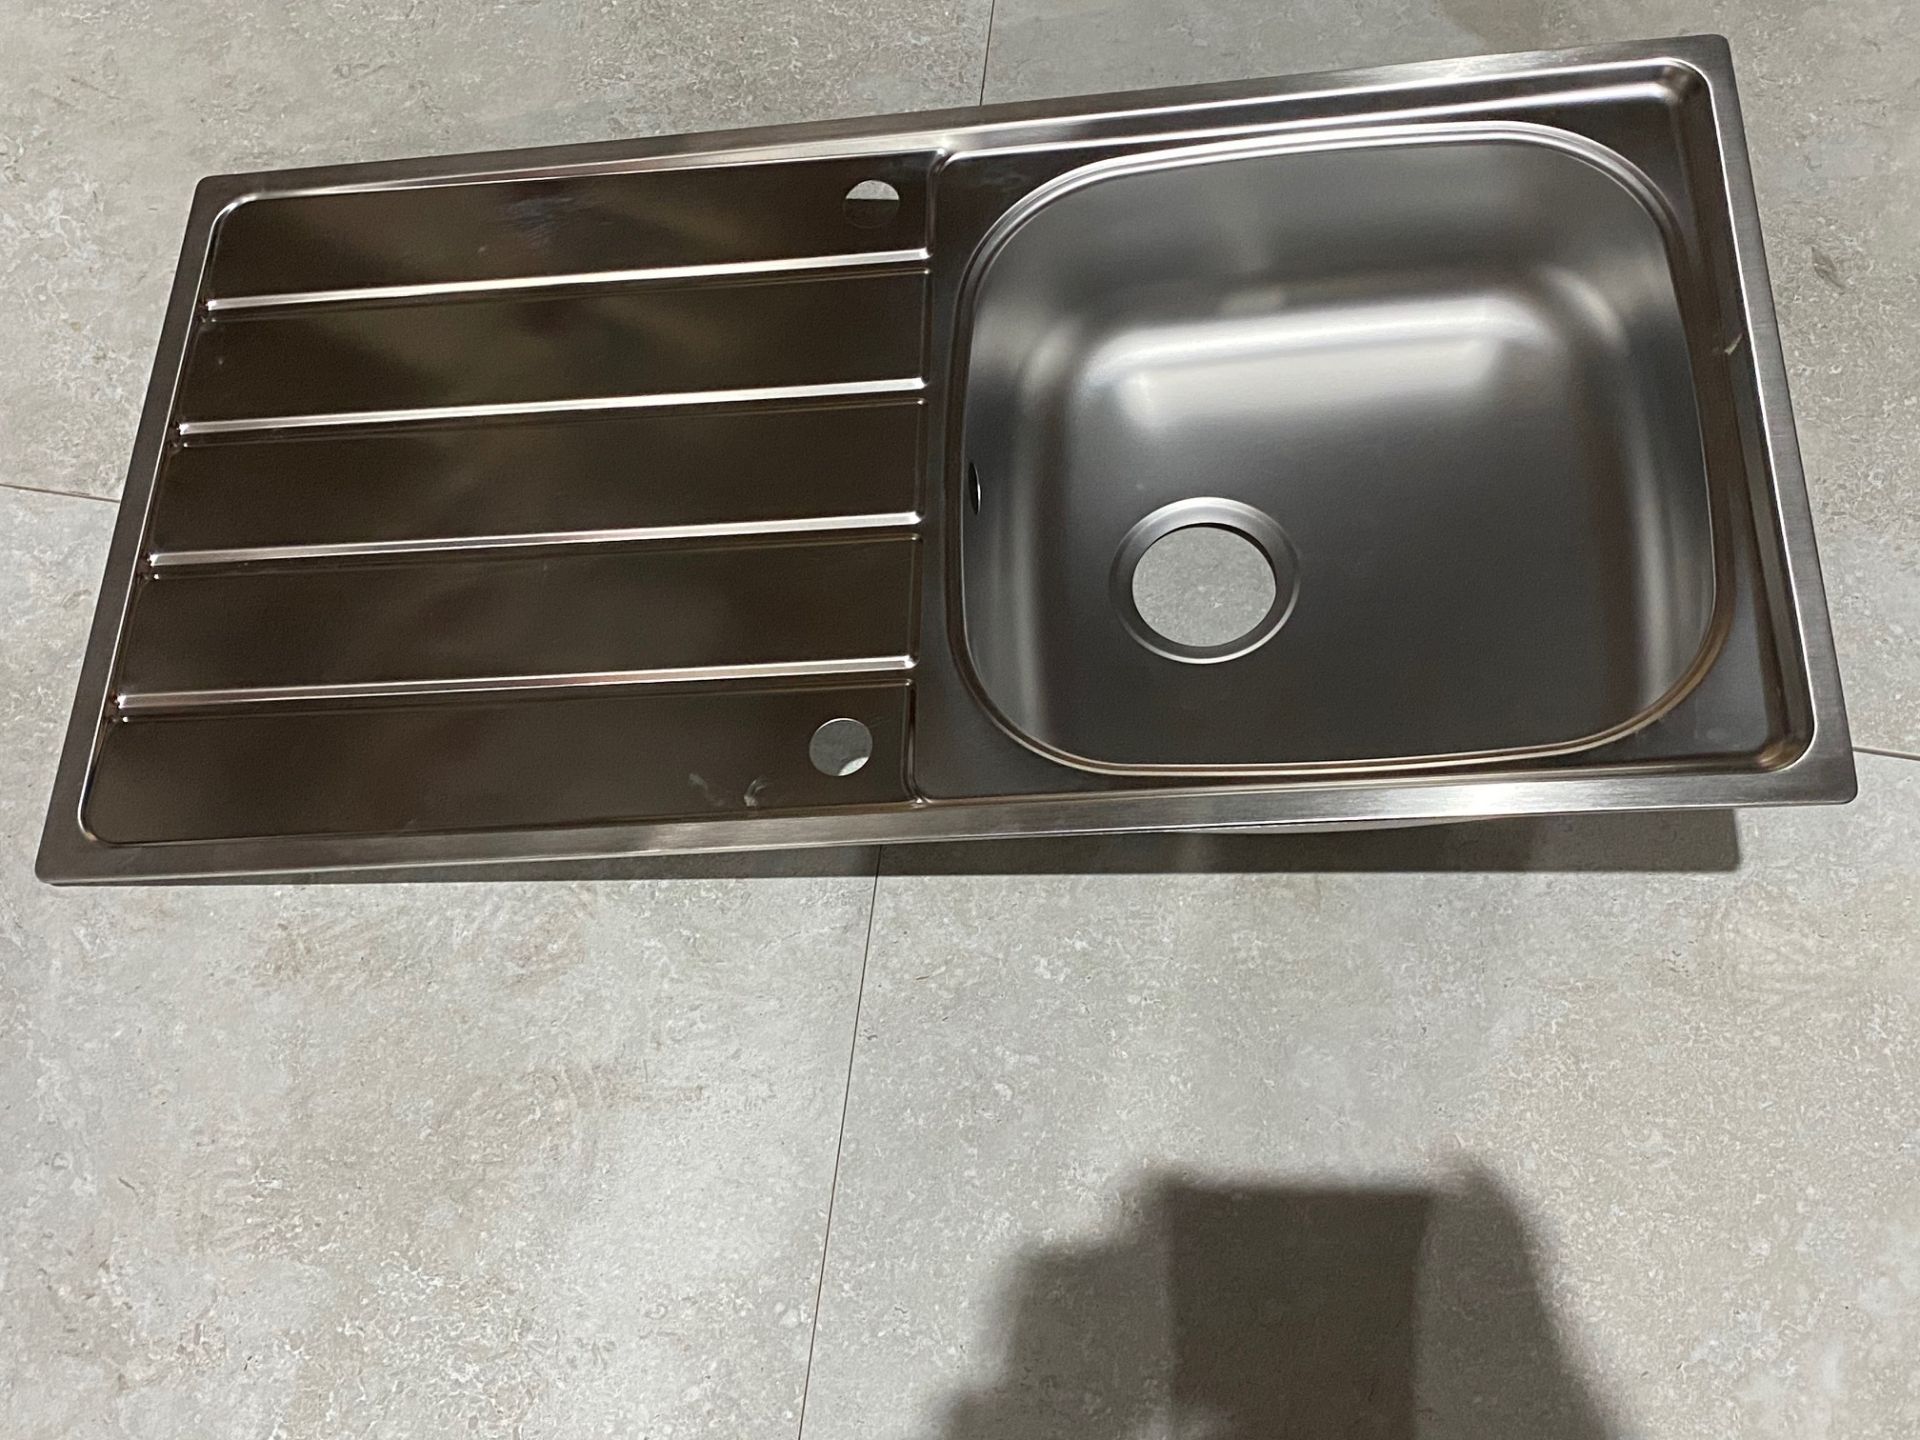 NEW (H115) 970x500mm Teka Stainles Steel Sink Bowl. - Image 2 of 2